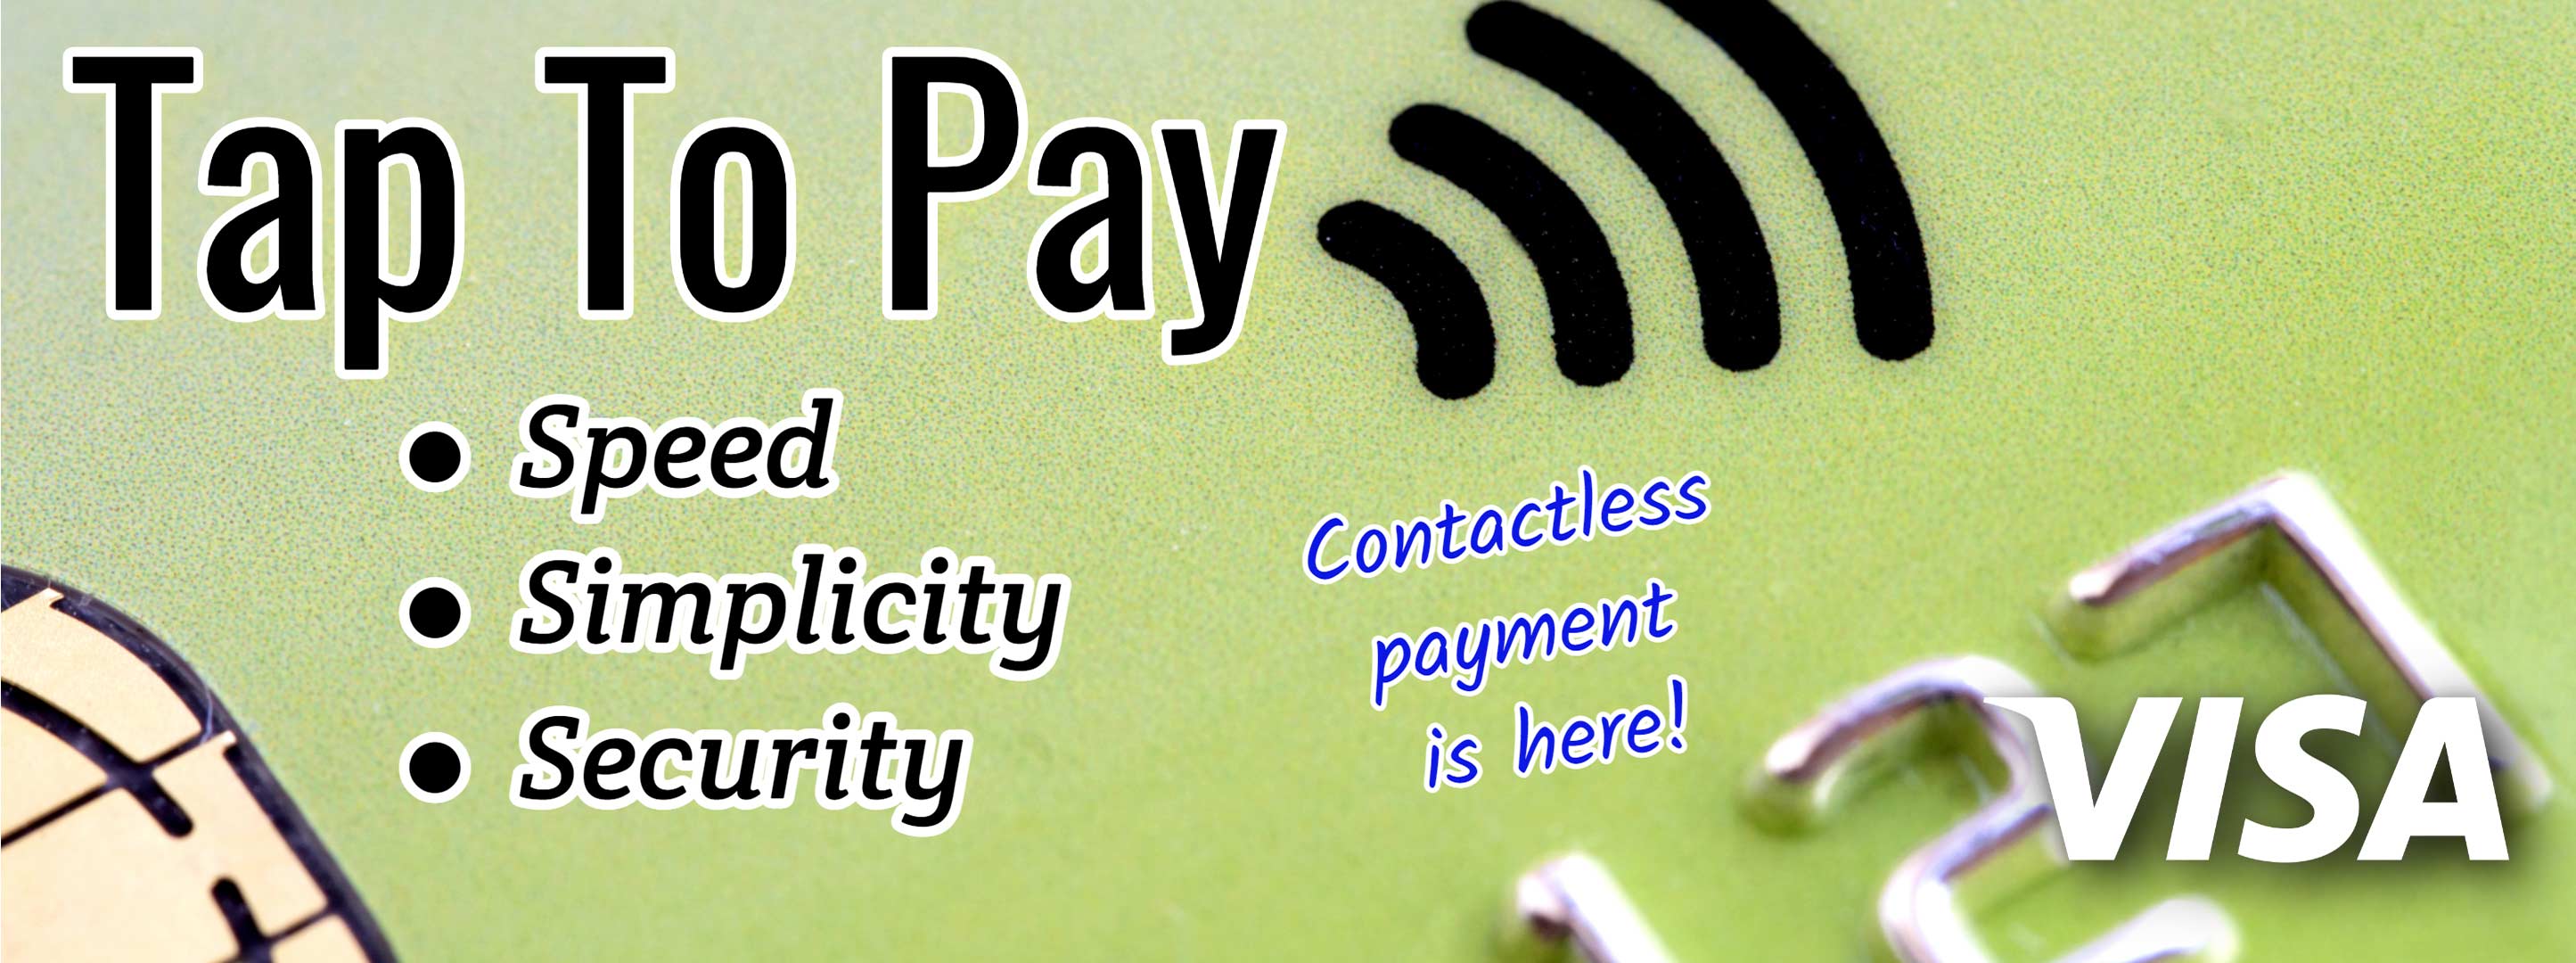 Tap to pay. Speed. Simplicity. Security. Contactless payment is here! VISA